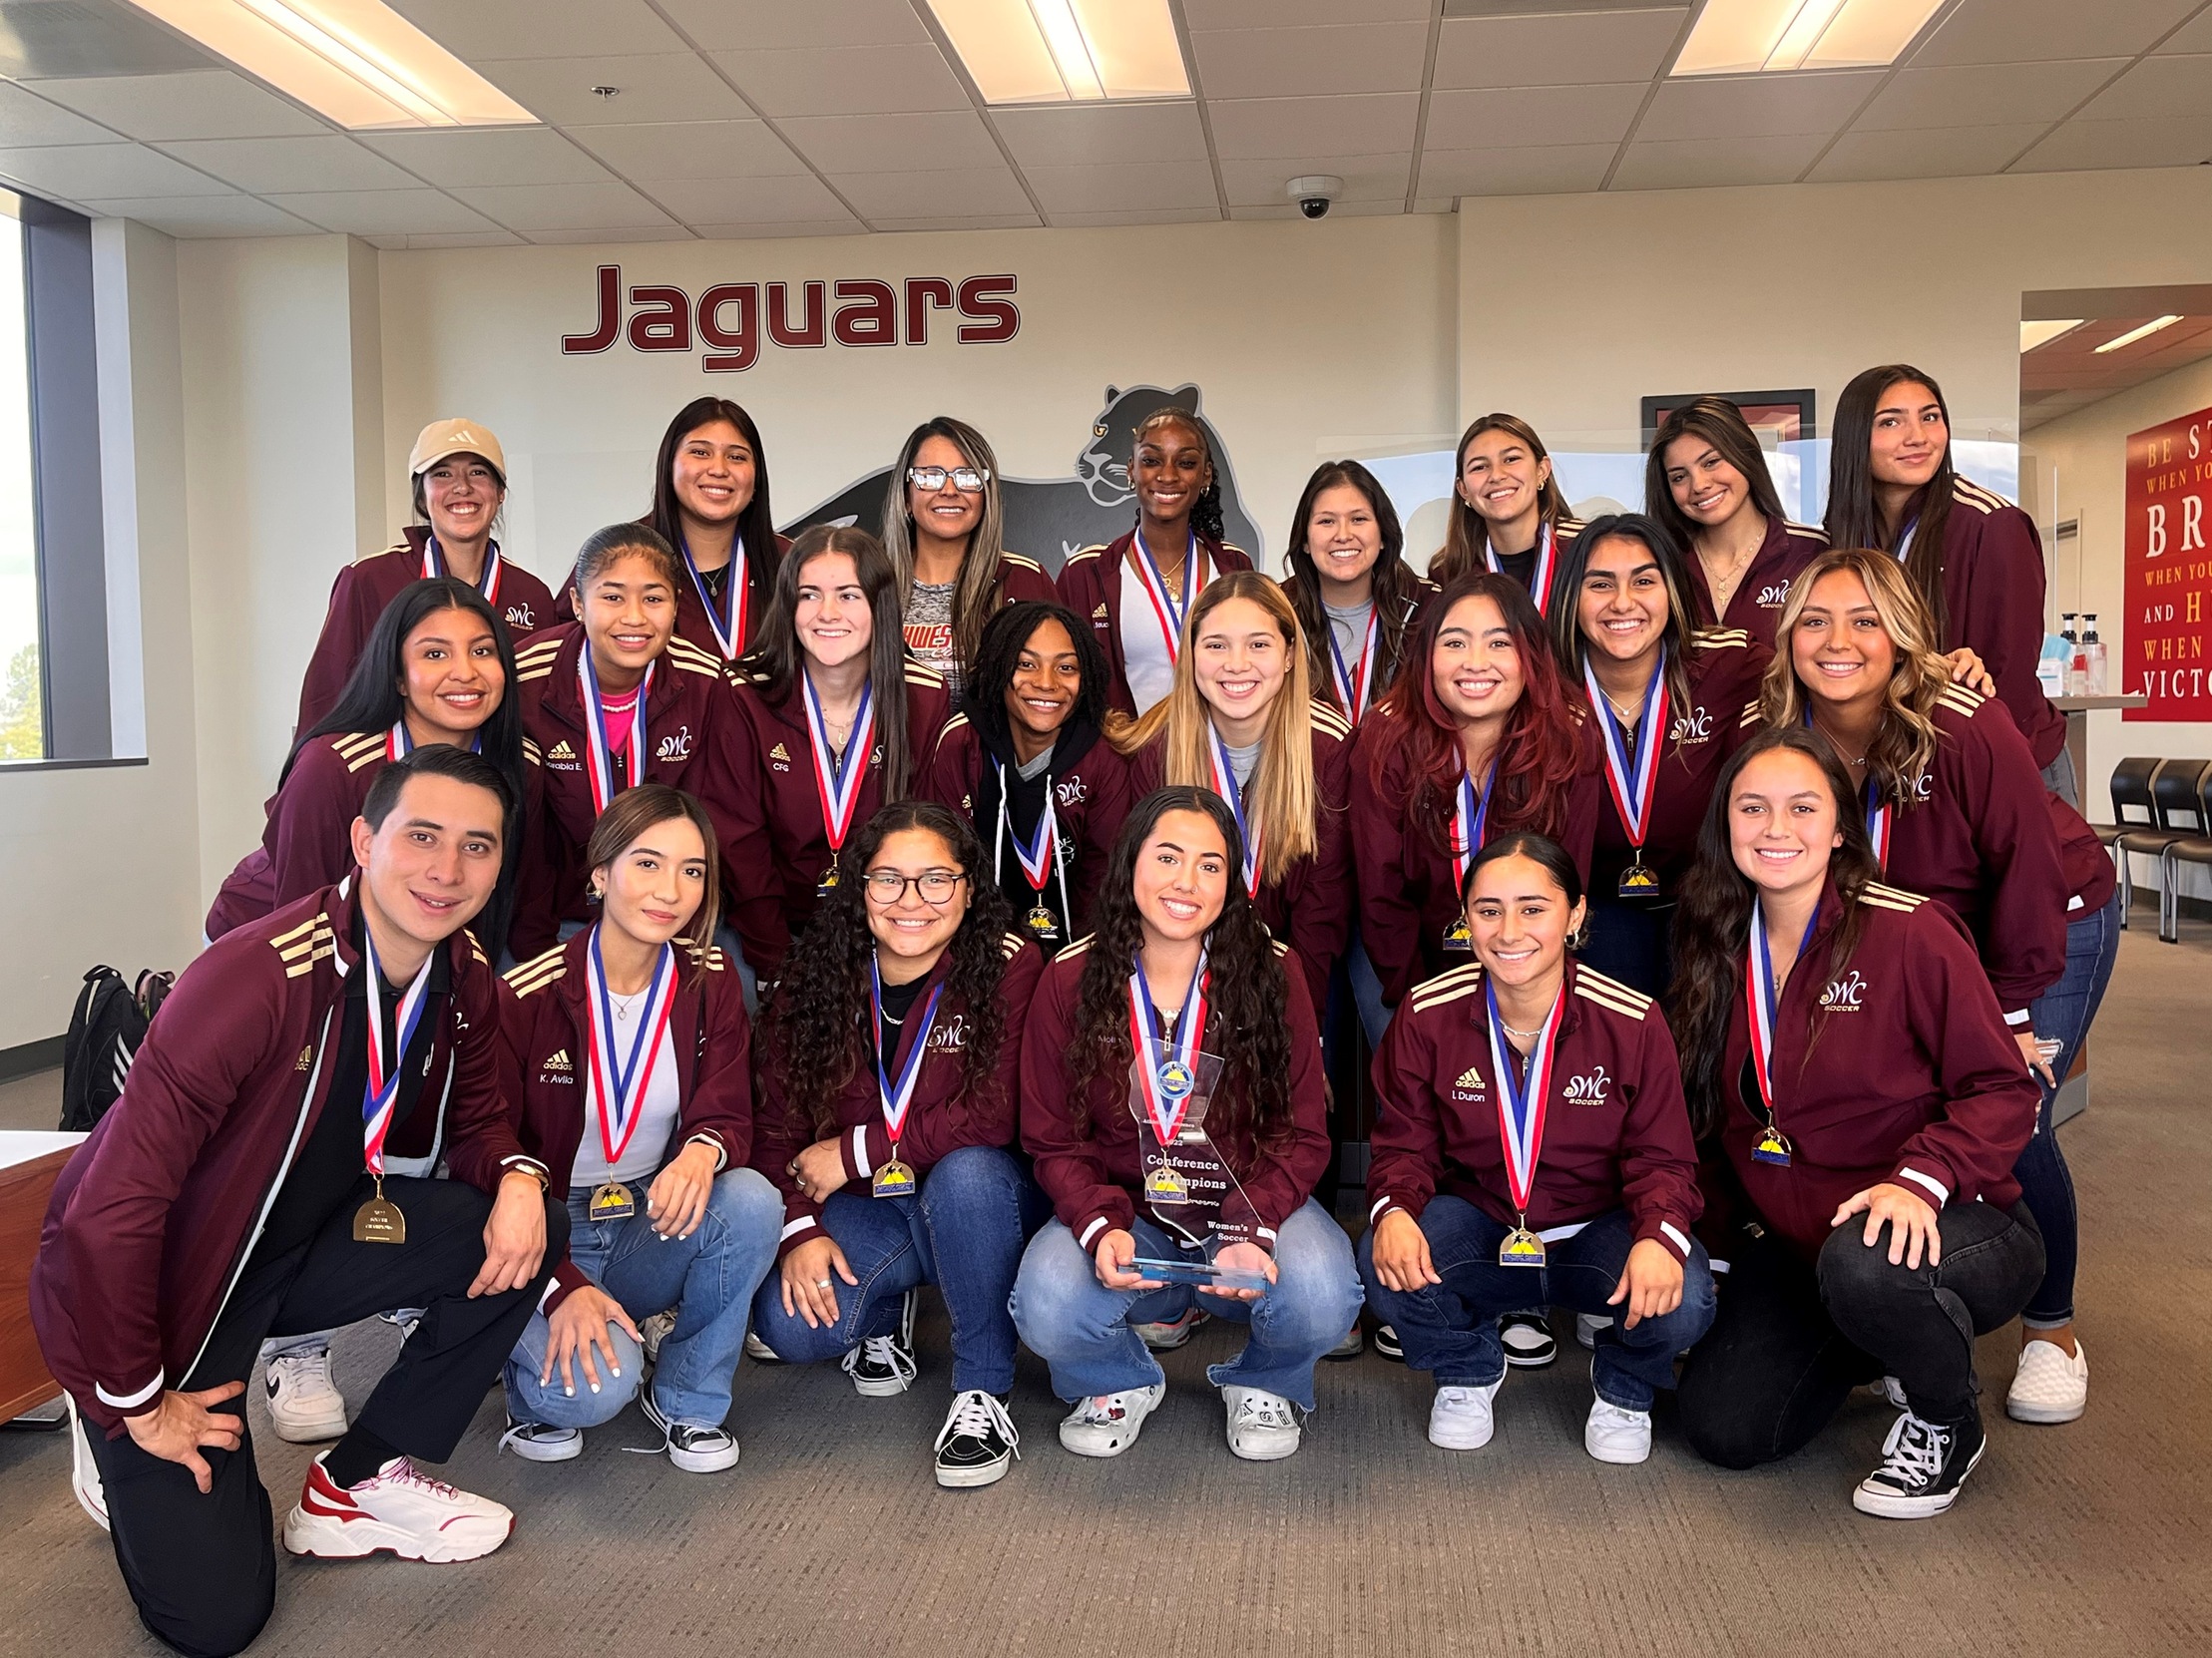 Celebrating more than medals: Southwestern soccer team composed of all women of color